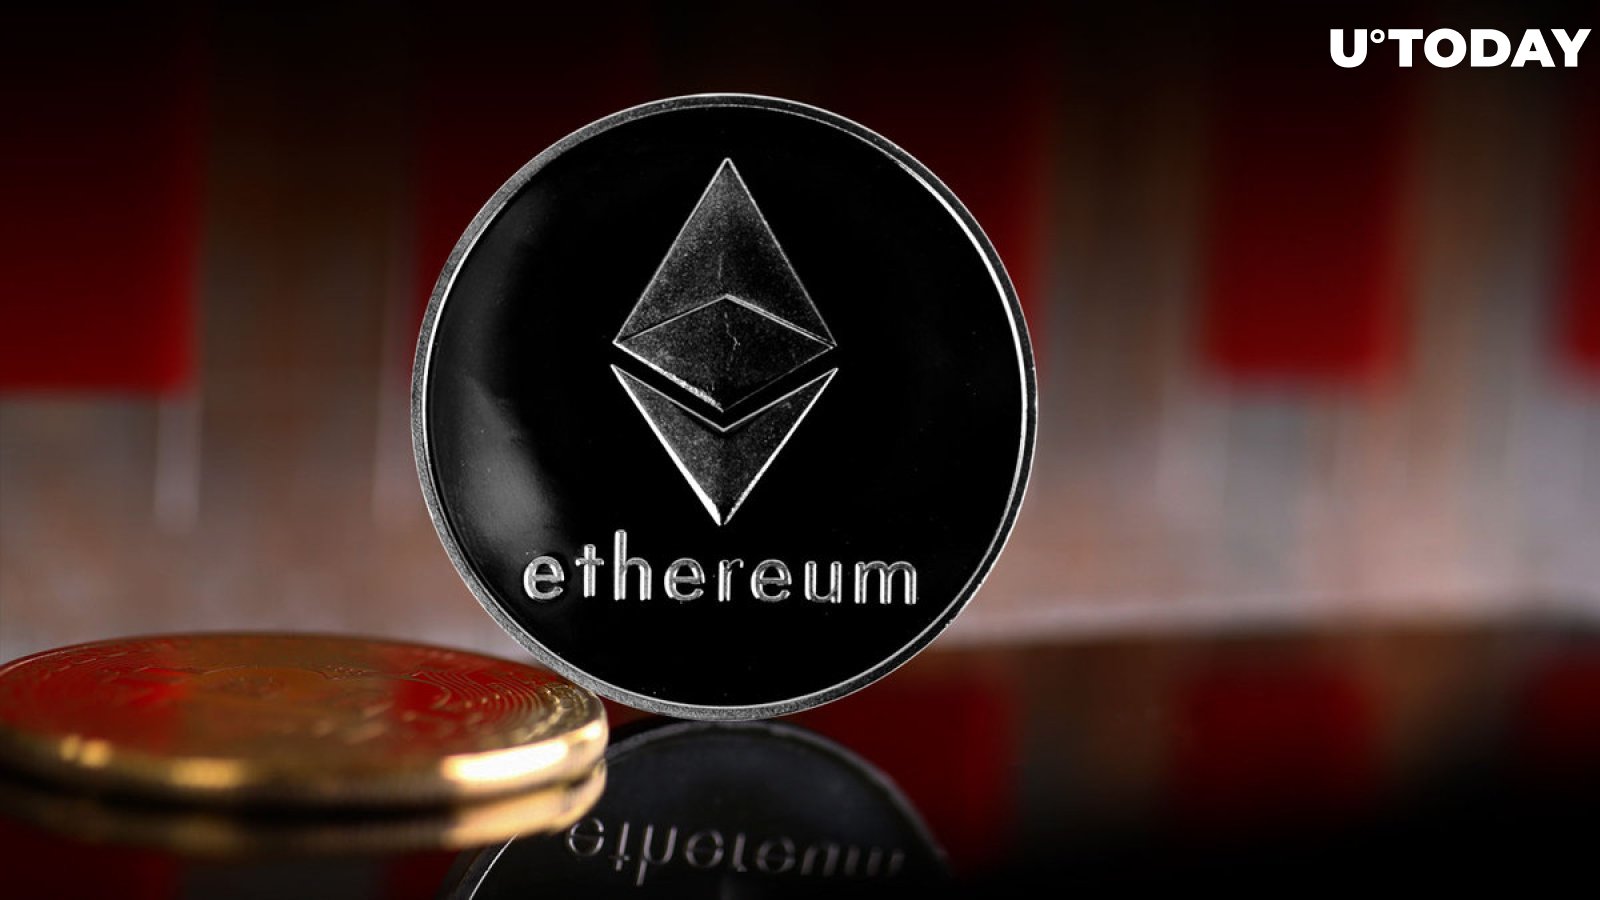 October 27 Critical Date for Ethereum (ETH), Here's Why